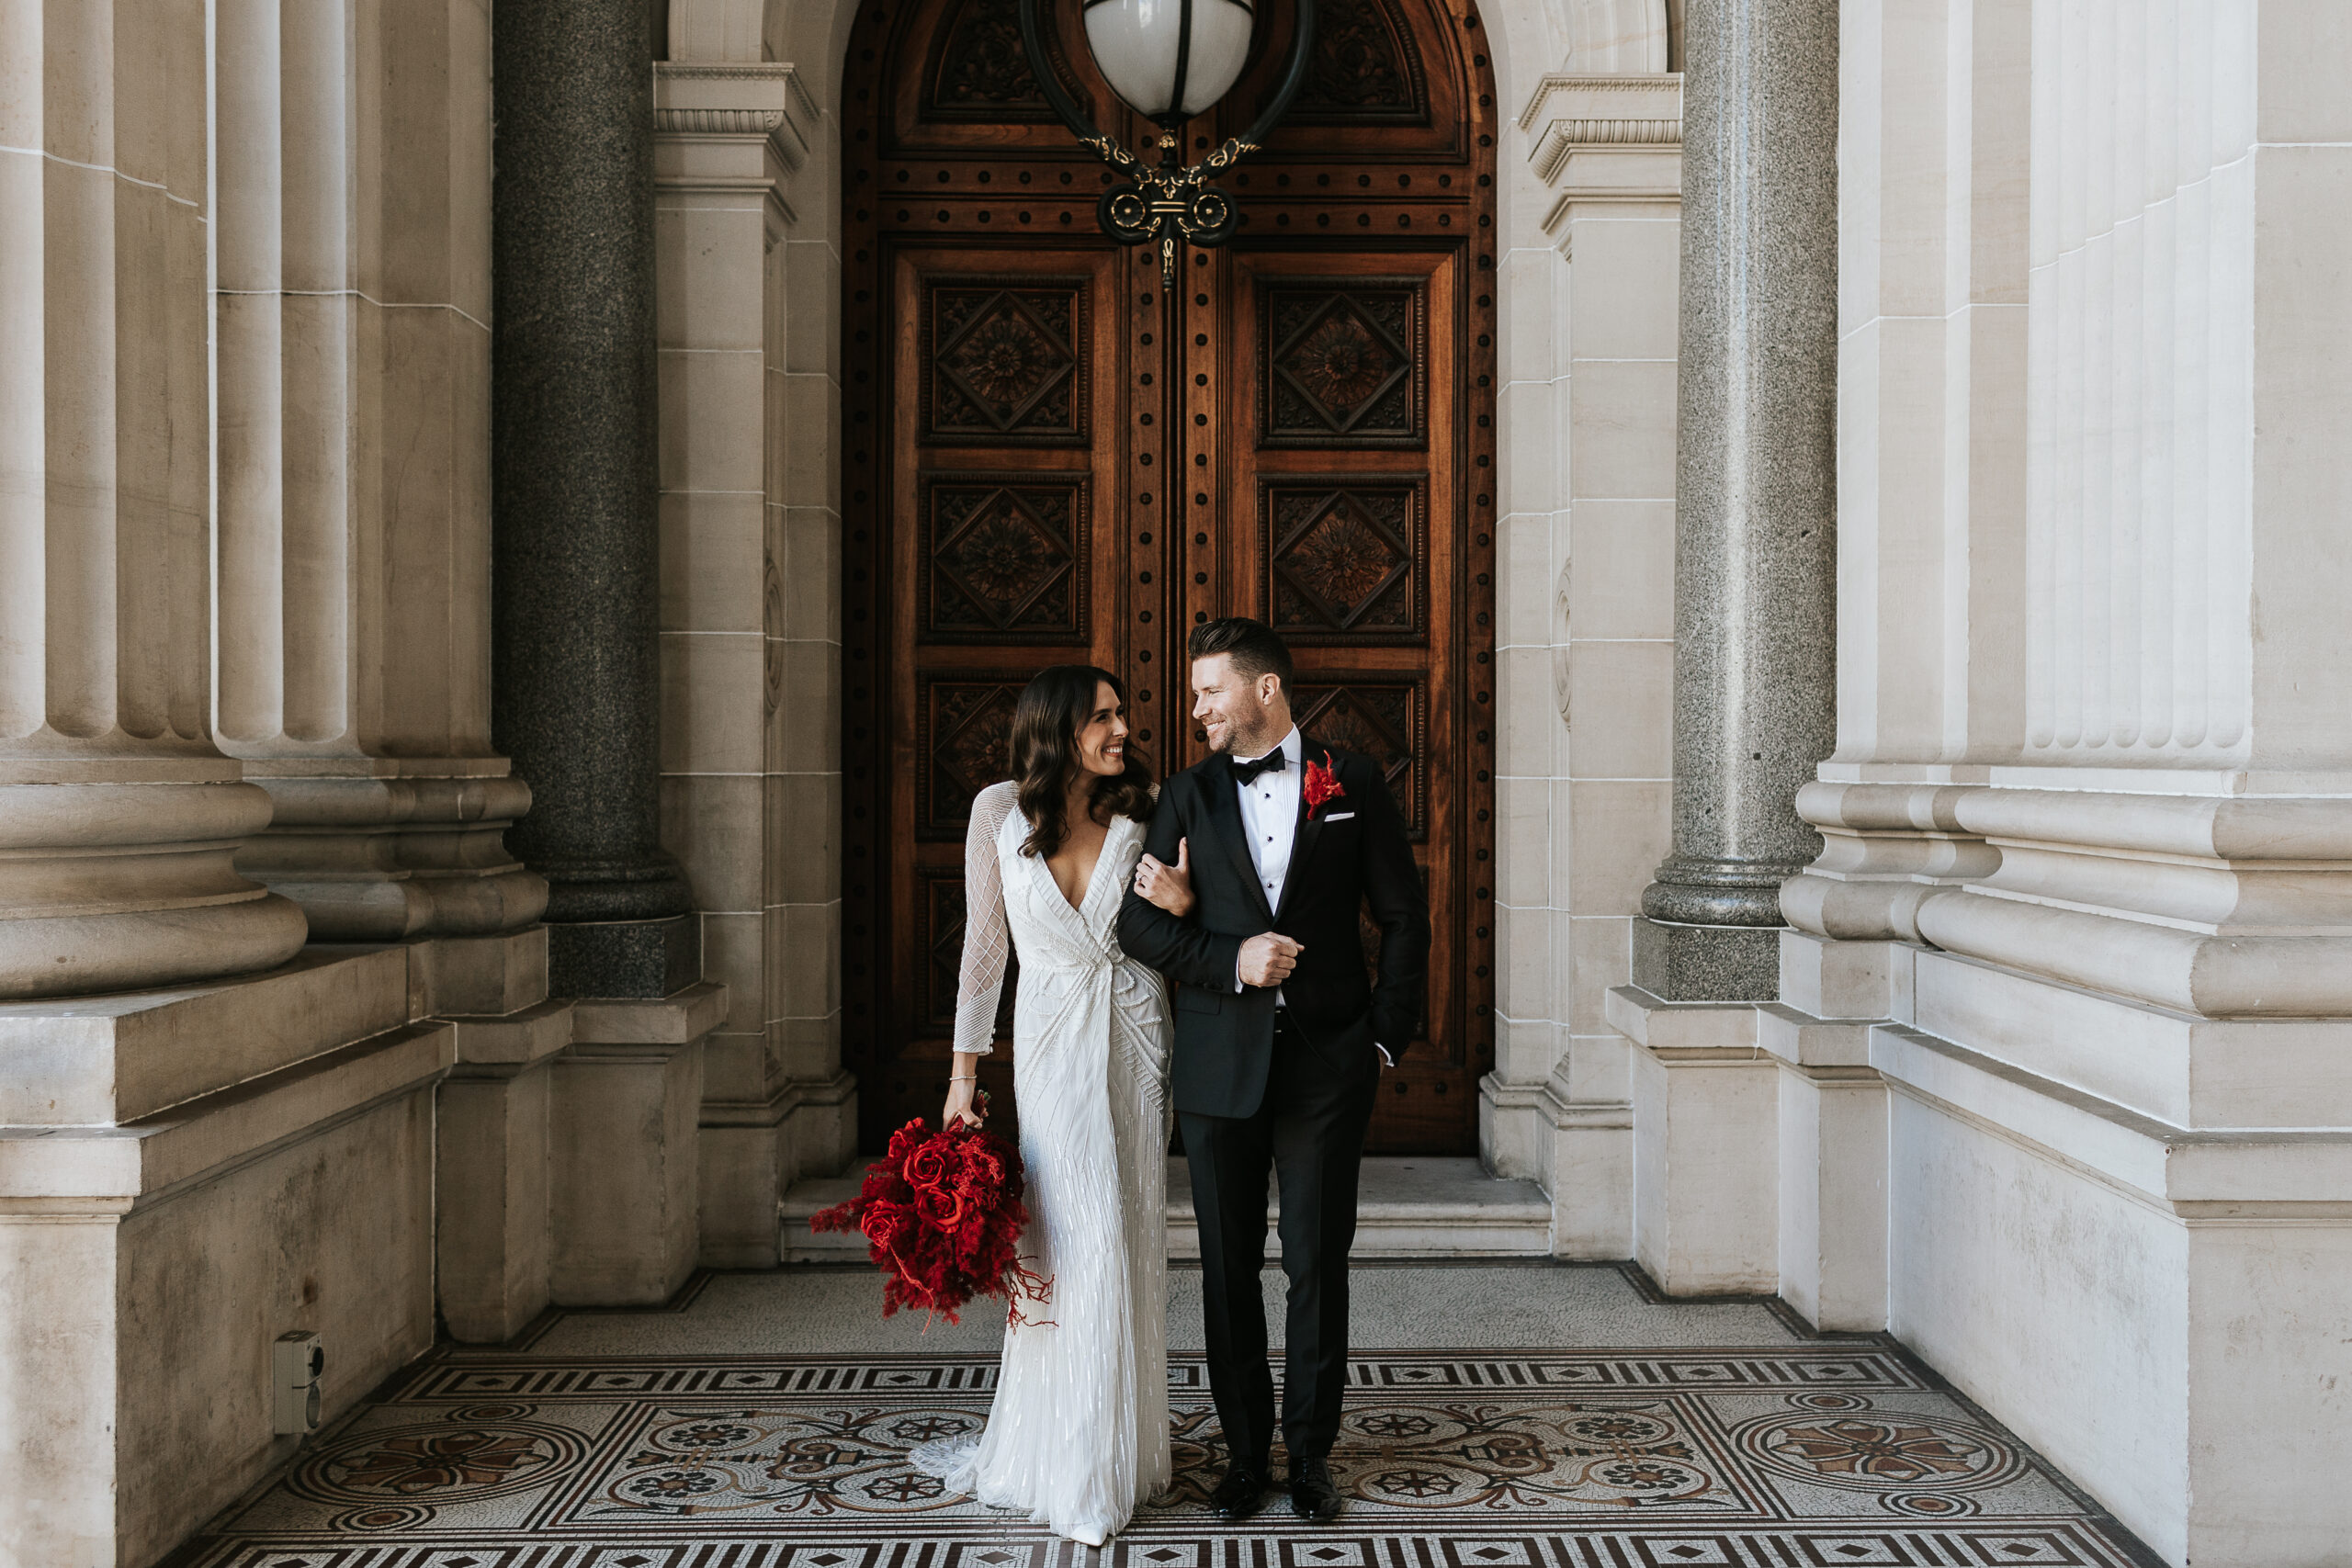 Gorgeous non-traditional modern bride and groom outfit for a